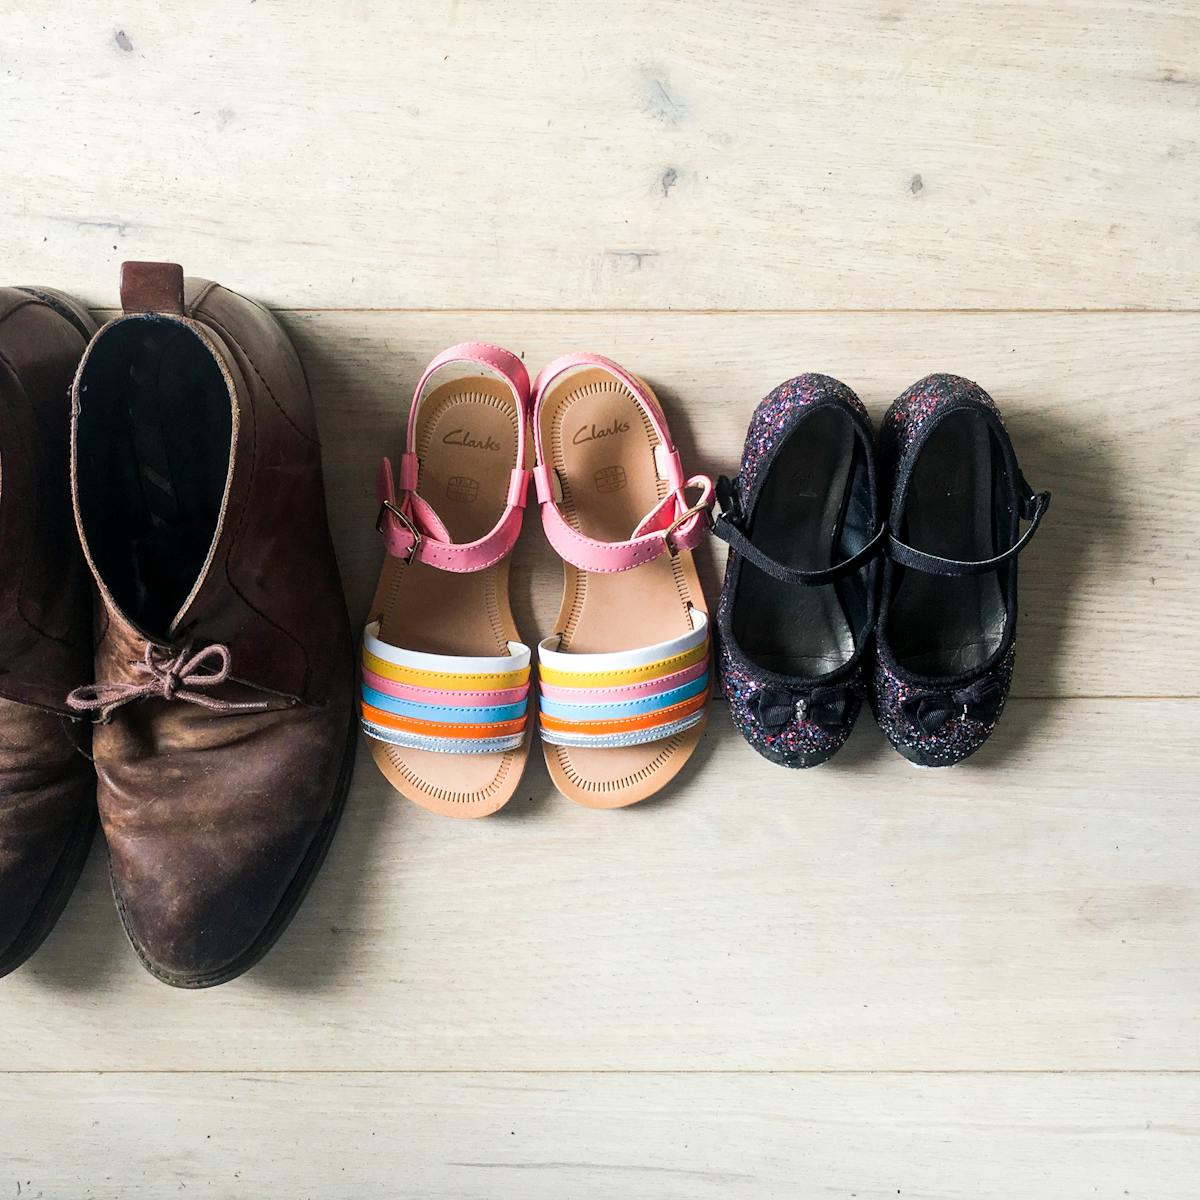 Photograph of a 'bird's eye' view of three pairs on shoes on a lime washed floor-boarded floor. The shoes are lined up in size order from largest on the left and smallest on the right. The largest are a pair of adults brown suede shoes with the laces tied and worn toe caps. In the middle are a pair of girl's sandals with rainbow coloured front straps and pink angle straps. On the far right are the smallest shoes, a pair of sparkly purple girls ballerina style pumps, with small black bows on the toes. 